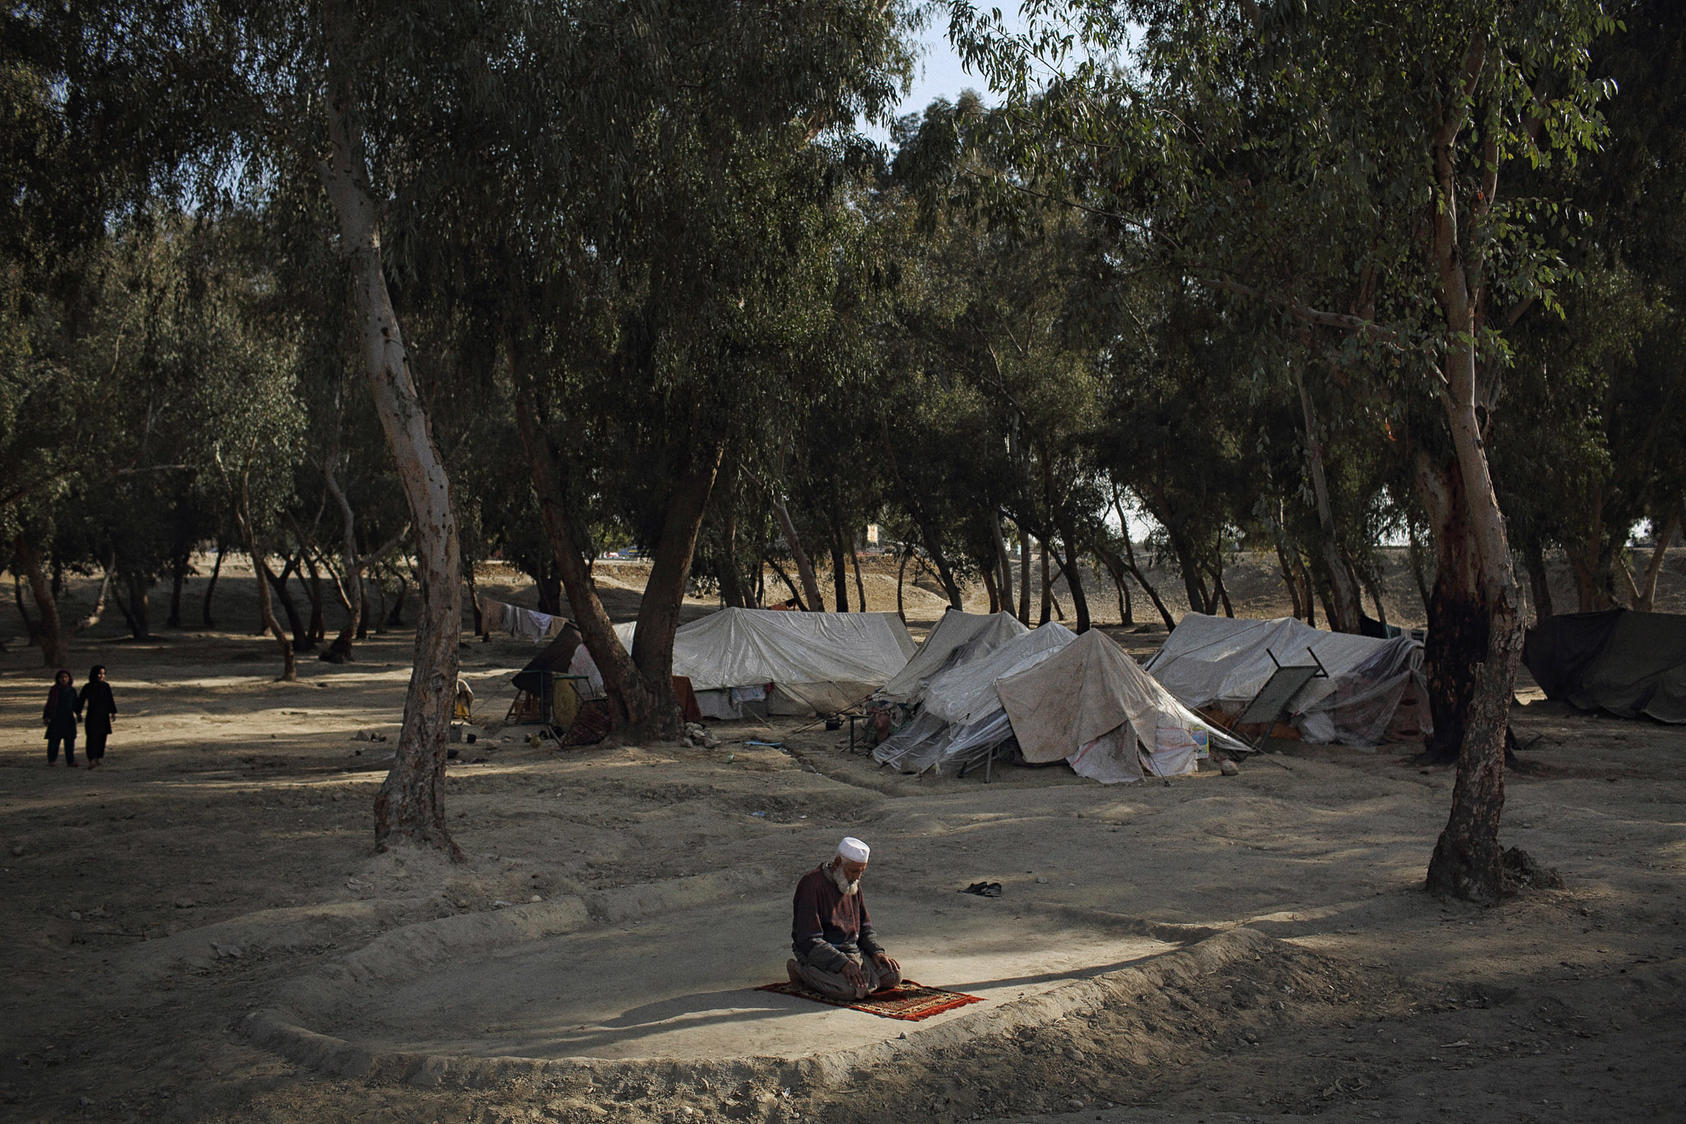 Haji Hazrat prays on the fringe of a makeshift camp in Jalalabad, Afghanistan. Afghan refugees say they are being forced to return to their homeland after a terrorist attack on a school in Pakistan fueled a new wave of resentment against them. The New York Times/Andrew Quilty